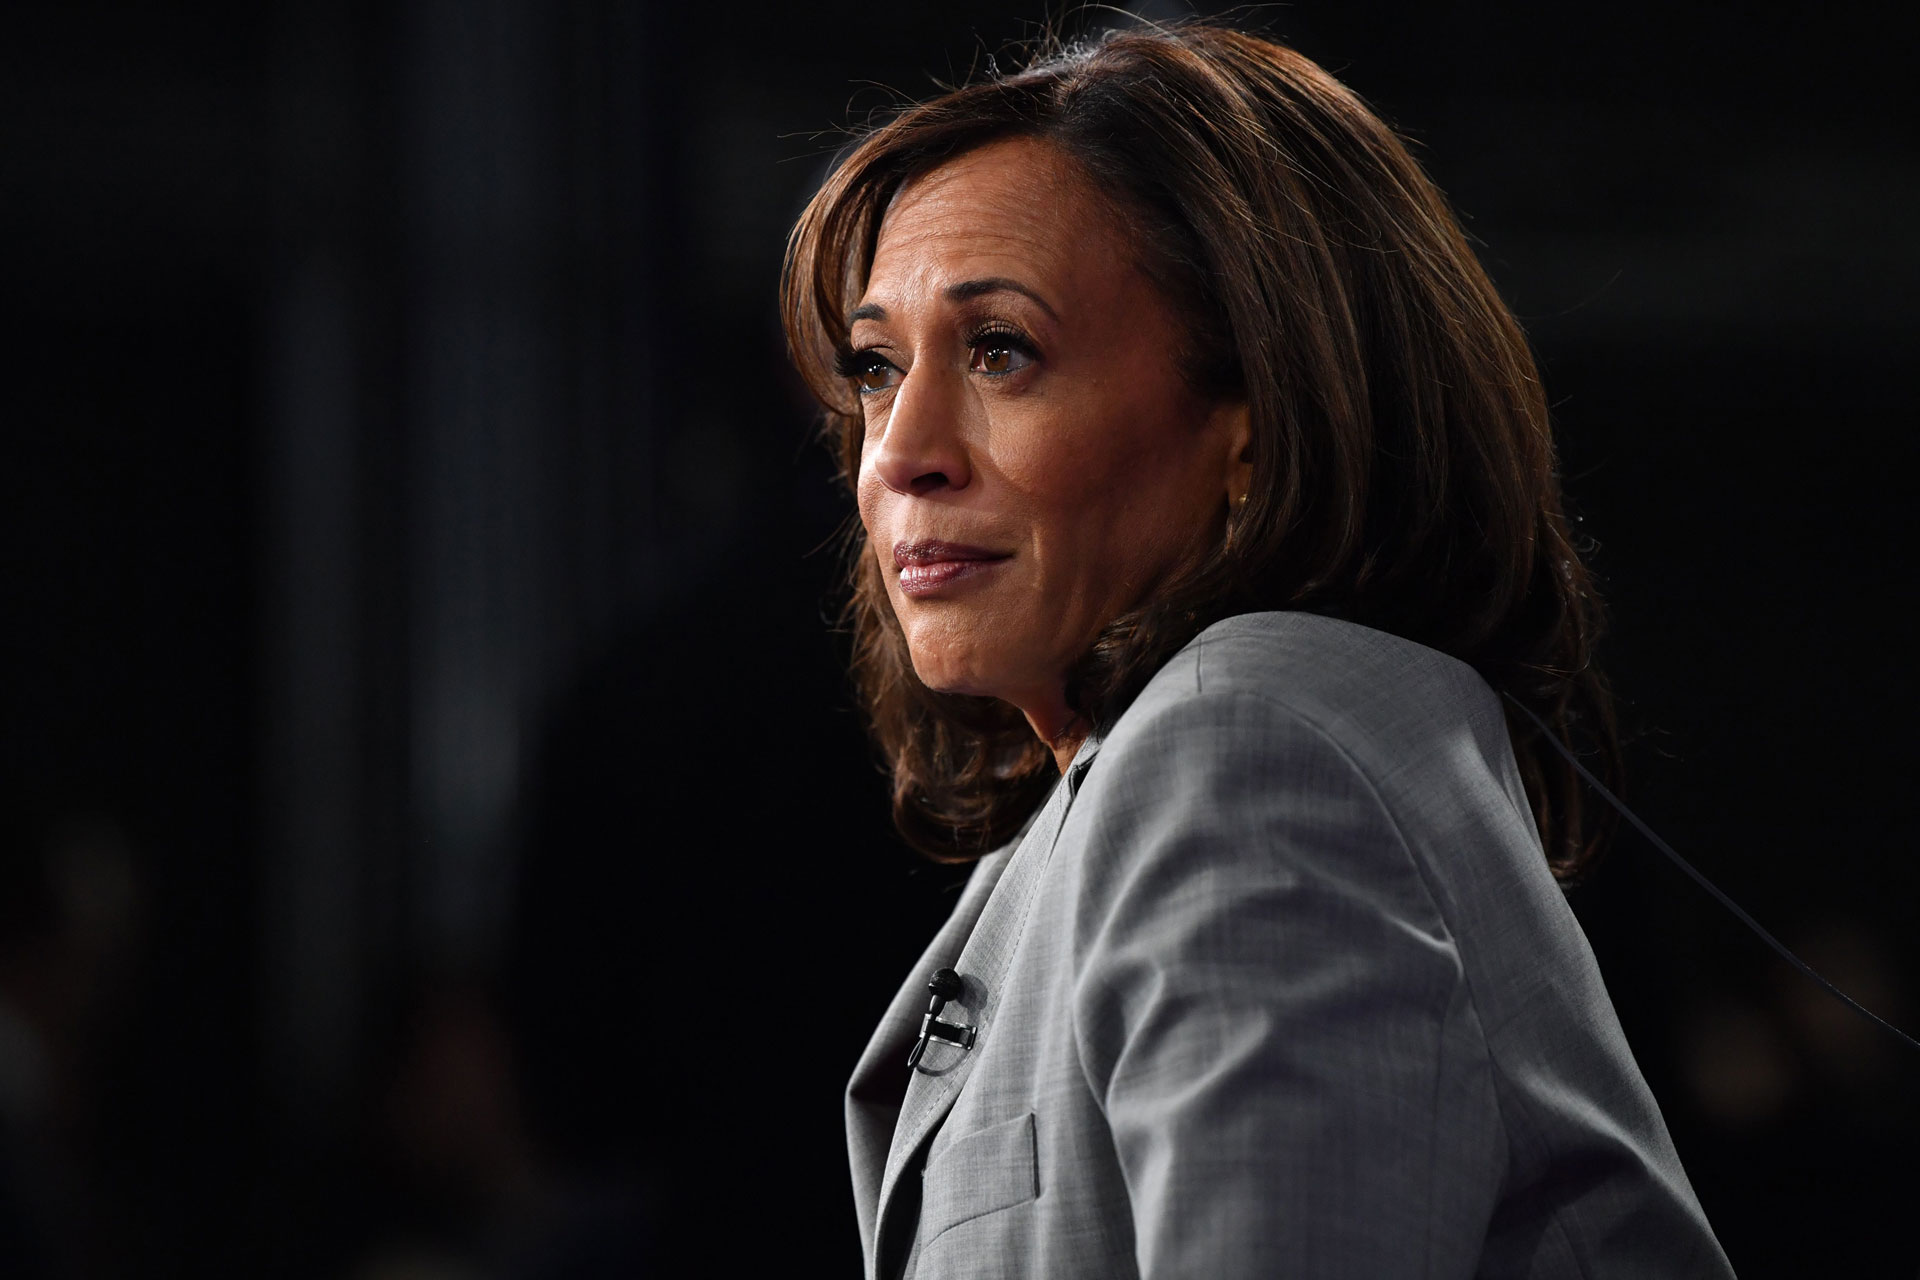 California Sen. Kamala Harris speaks to the press after participating in a Democratic primary debate on Nov. 20. Harris announced Tuesday that she's dropping out of the presidential race.